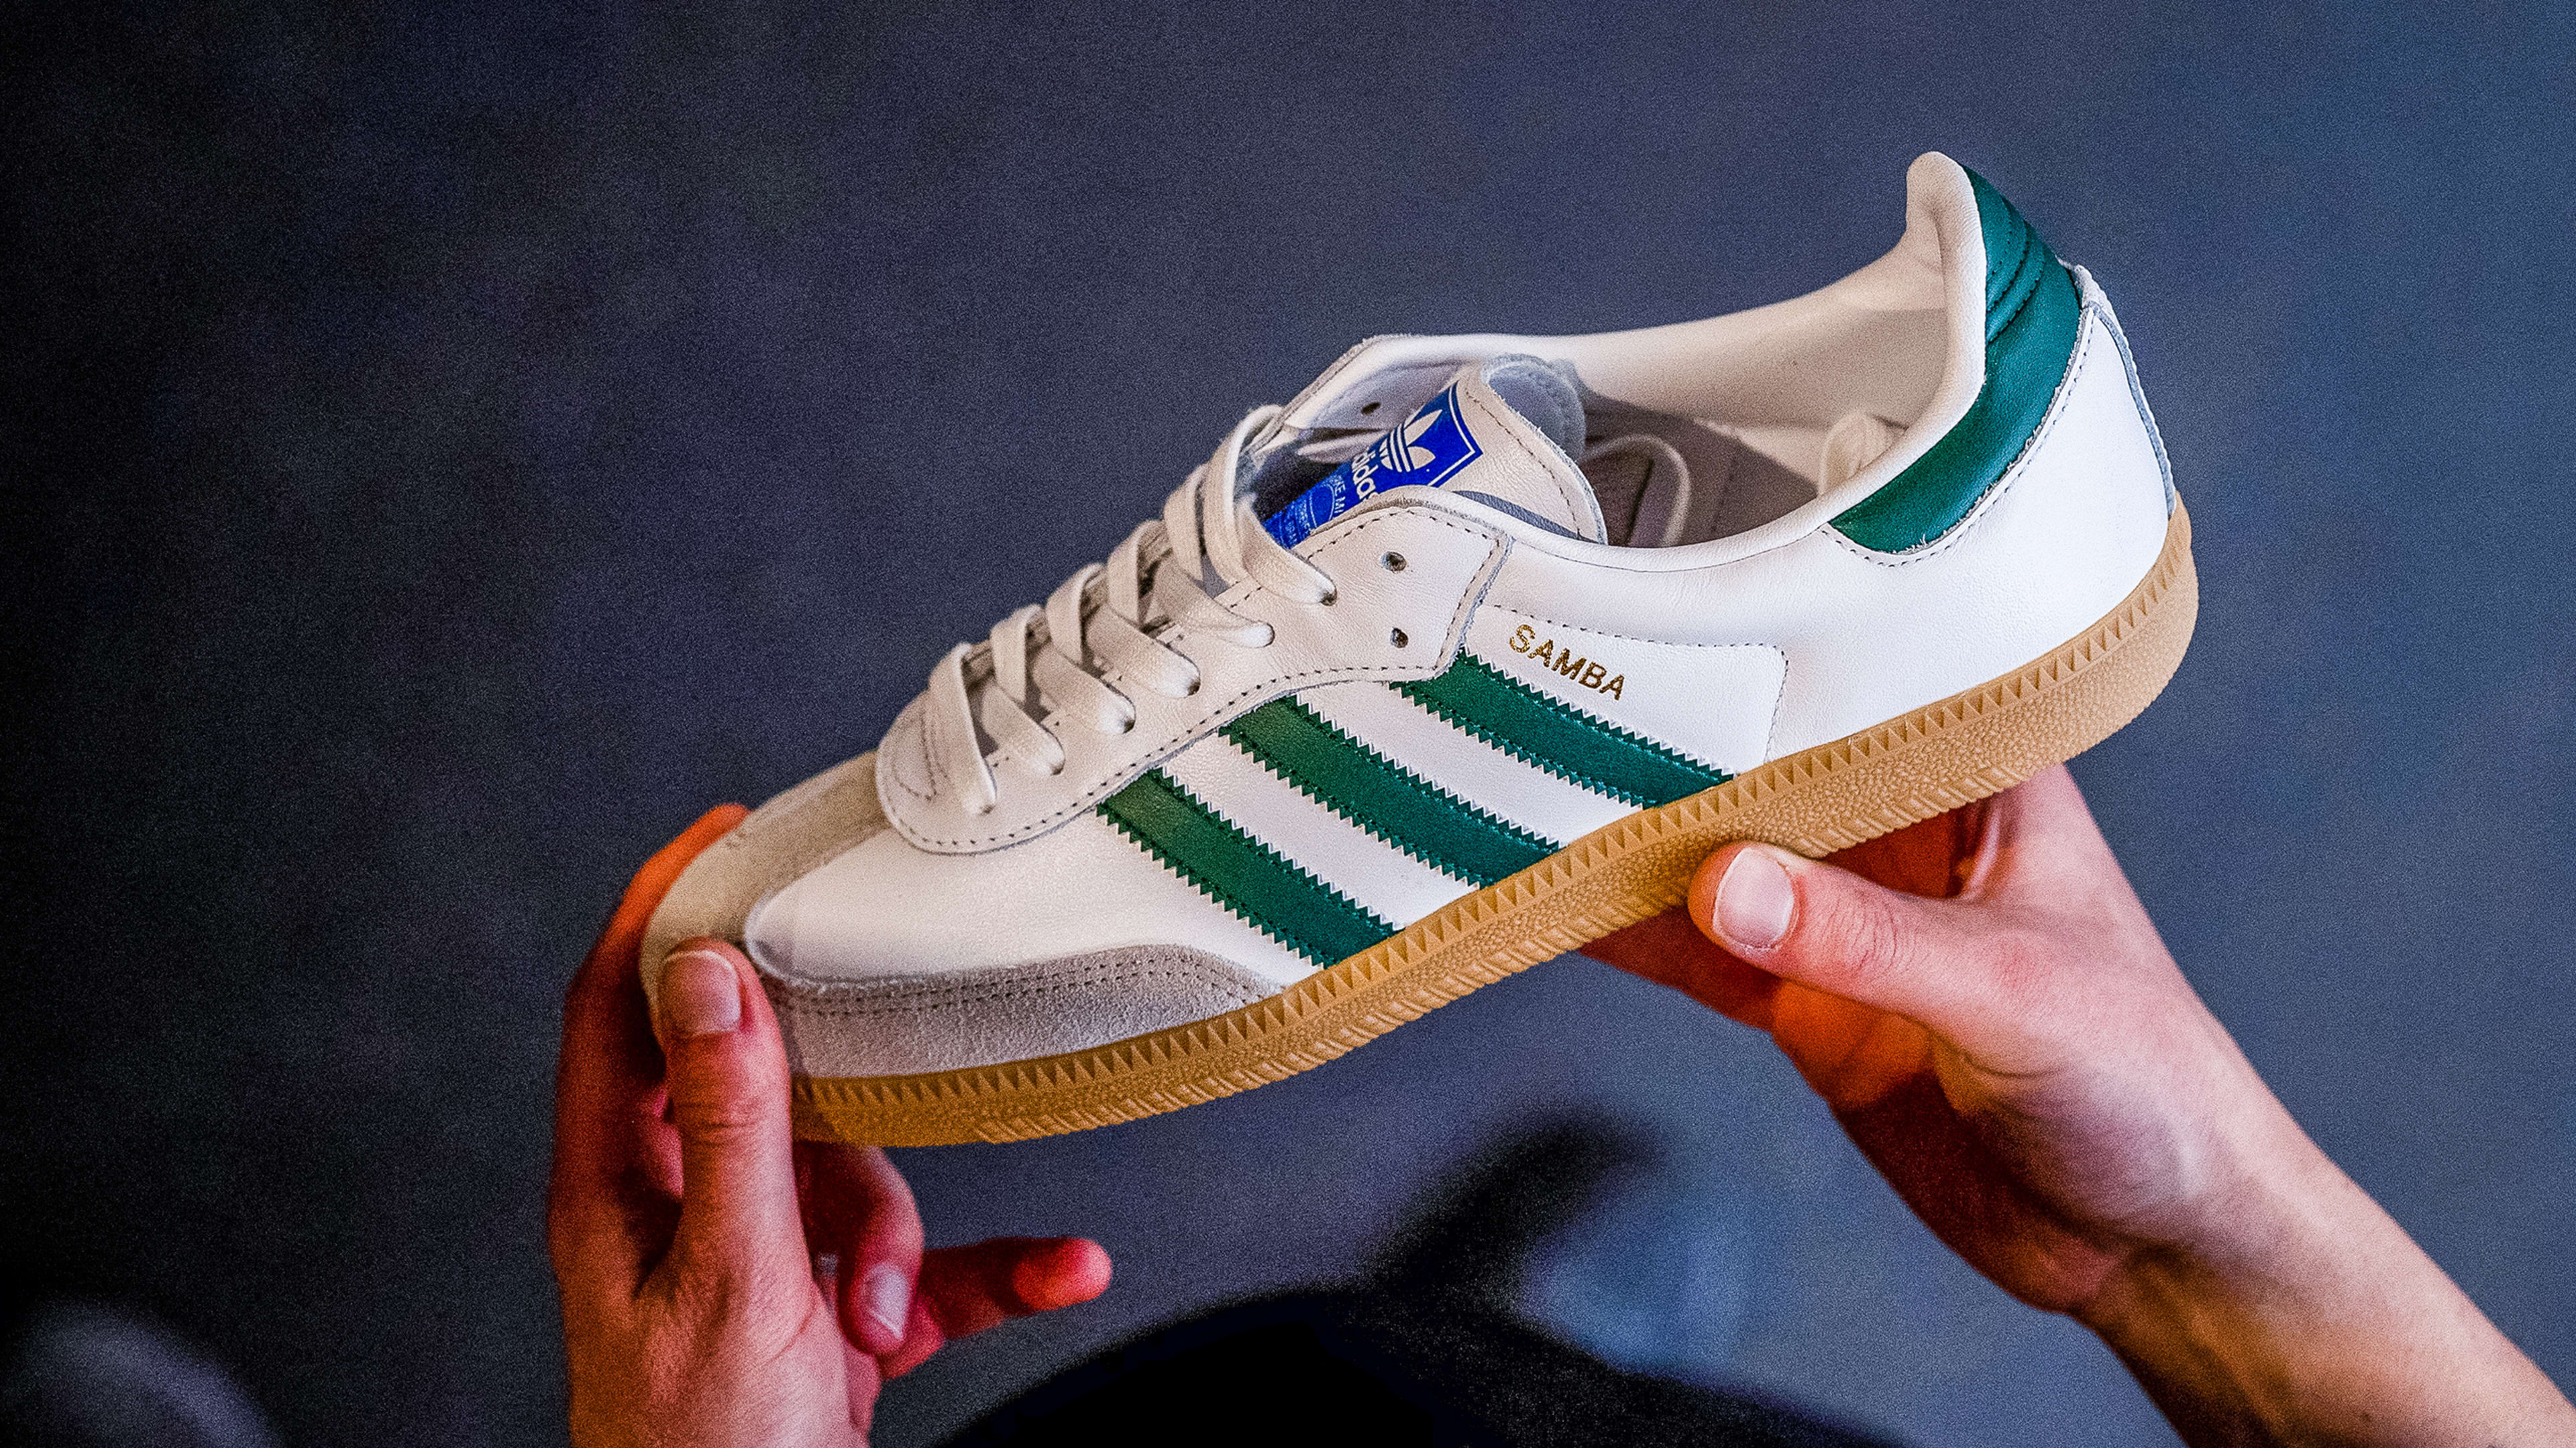 Sneaker sales for Sambas, the 2023 ‘Shoe of the Year’, will likely peak soon, but Adidas has a plan